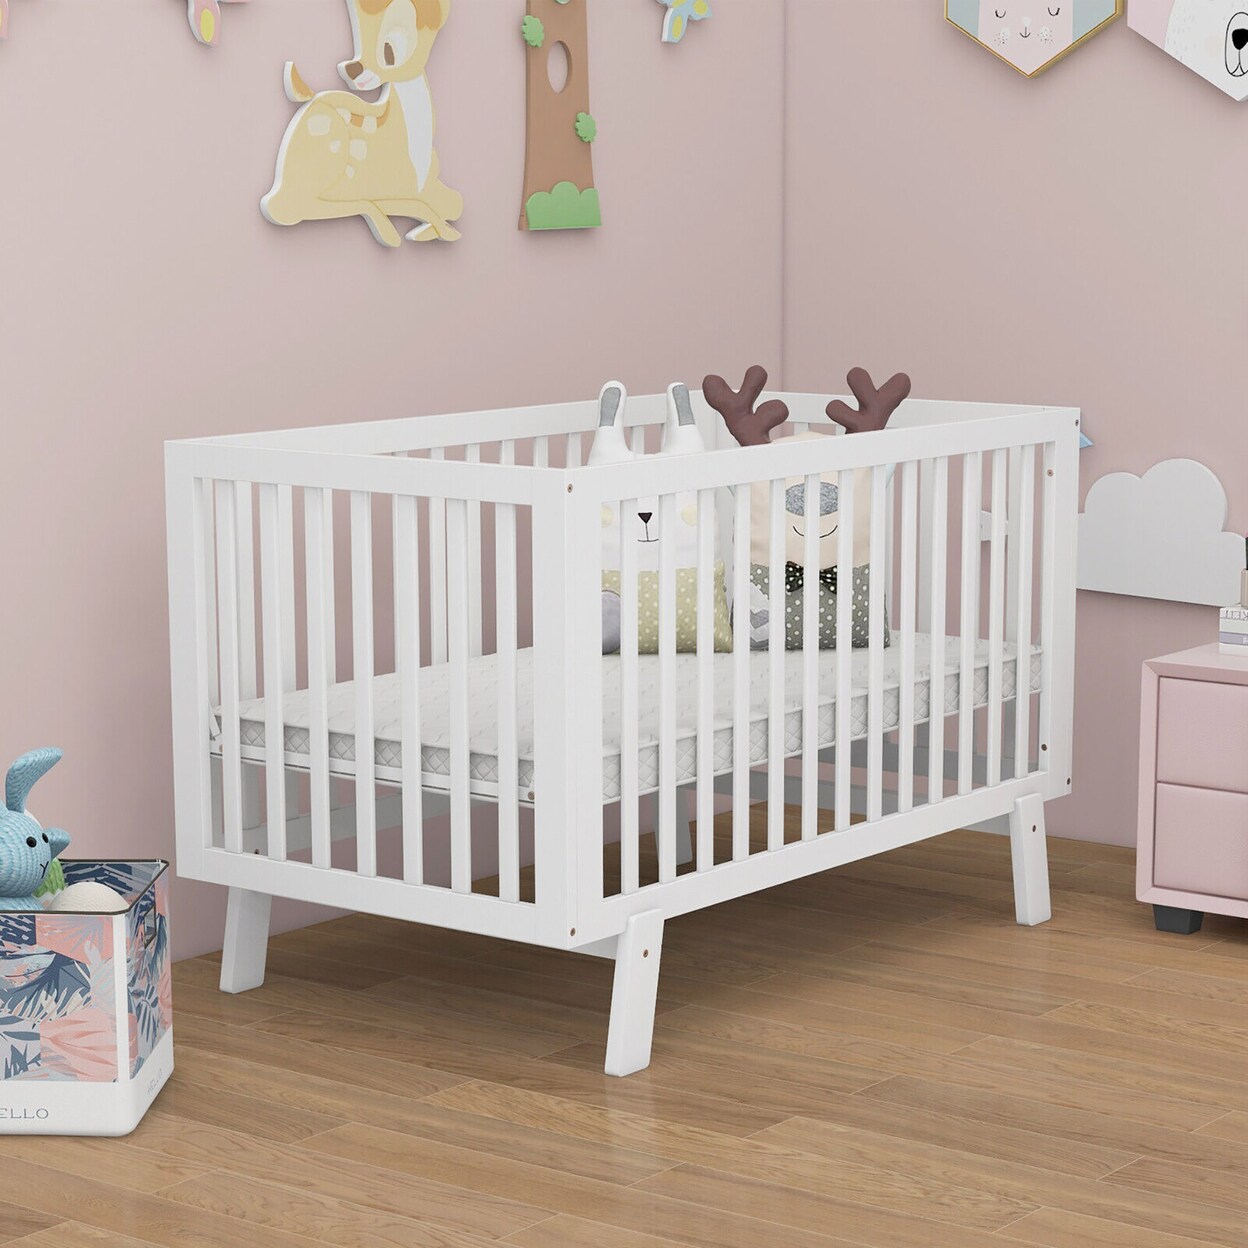 Gymax Wooden Baby Crib 3-Height Adjustable Wood Mini Crib Non-Toxic Finish In White